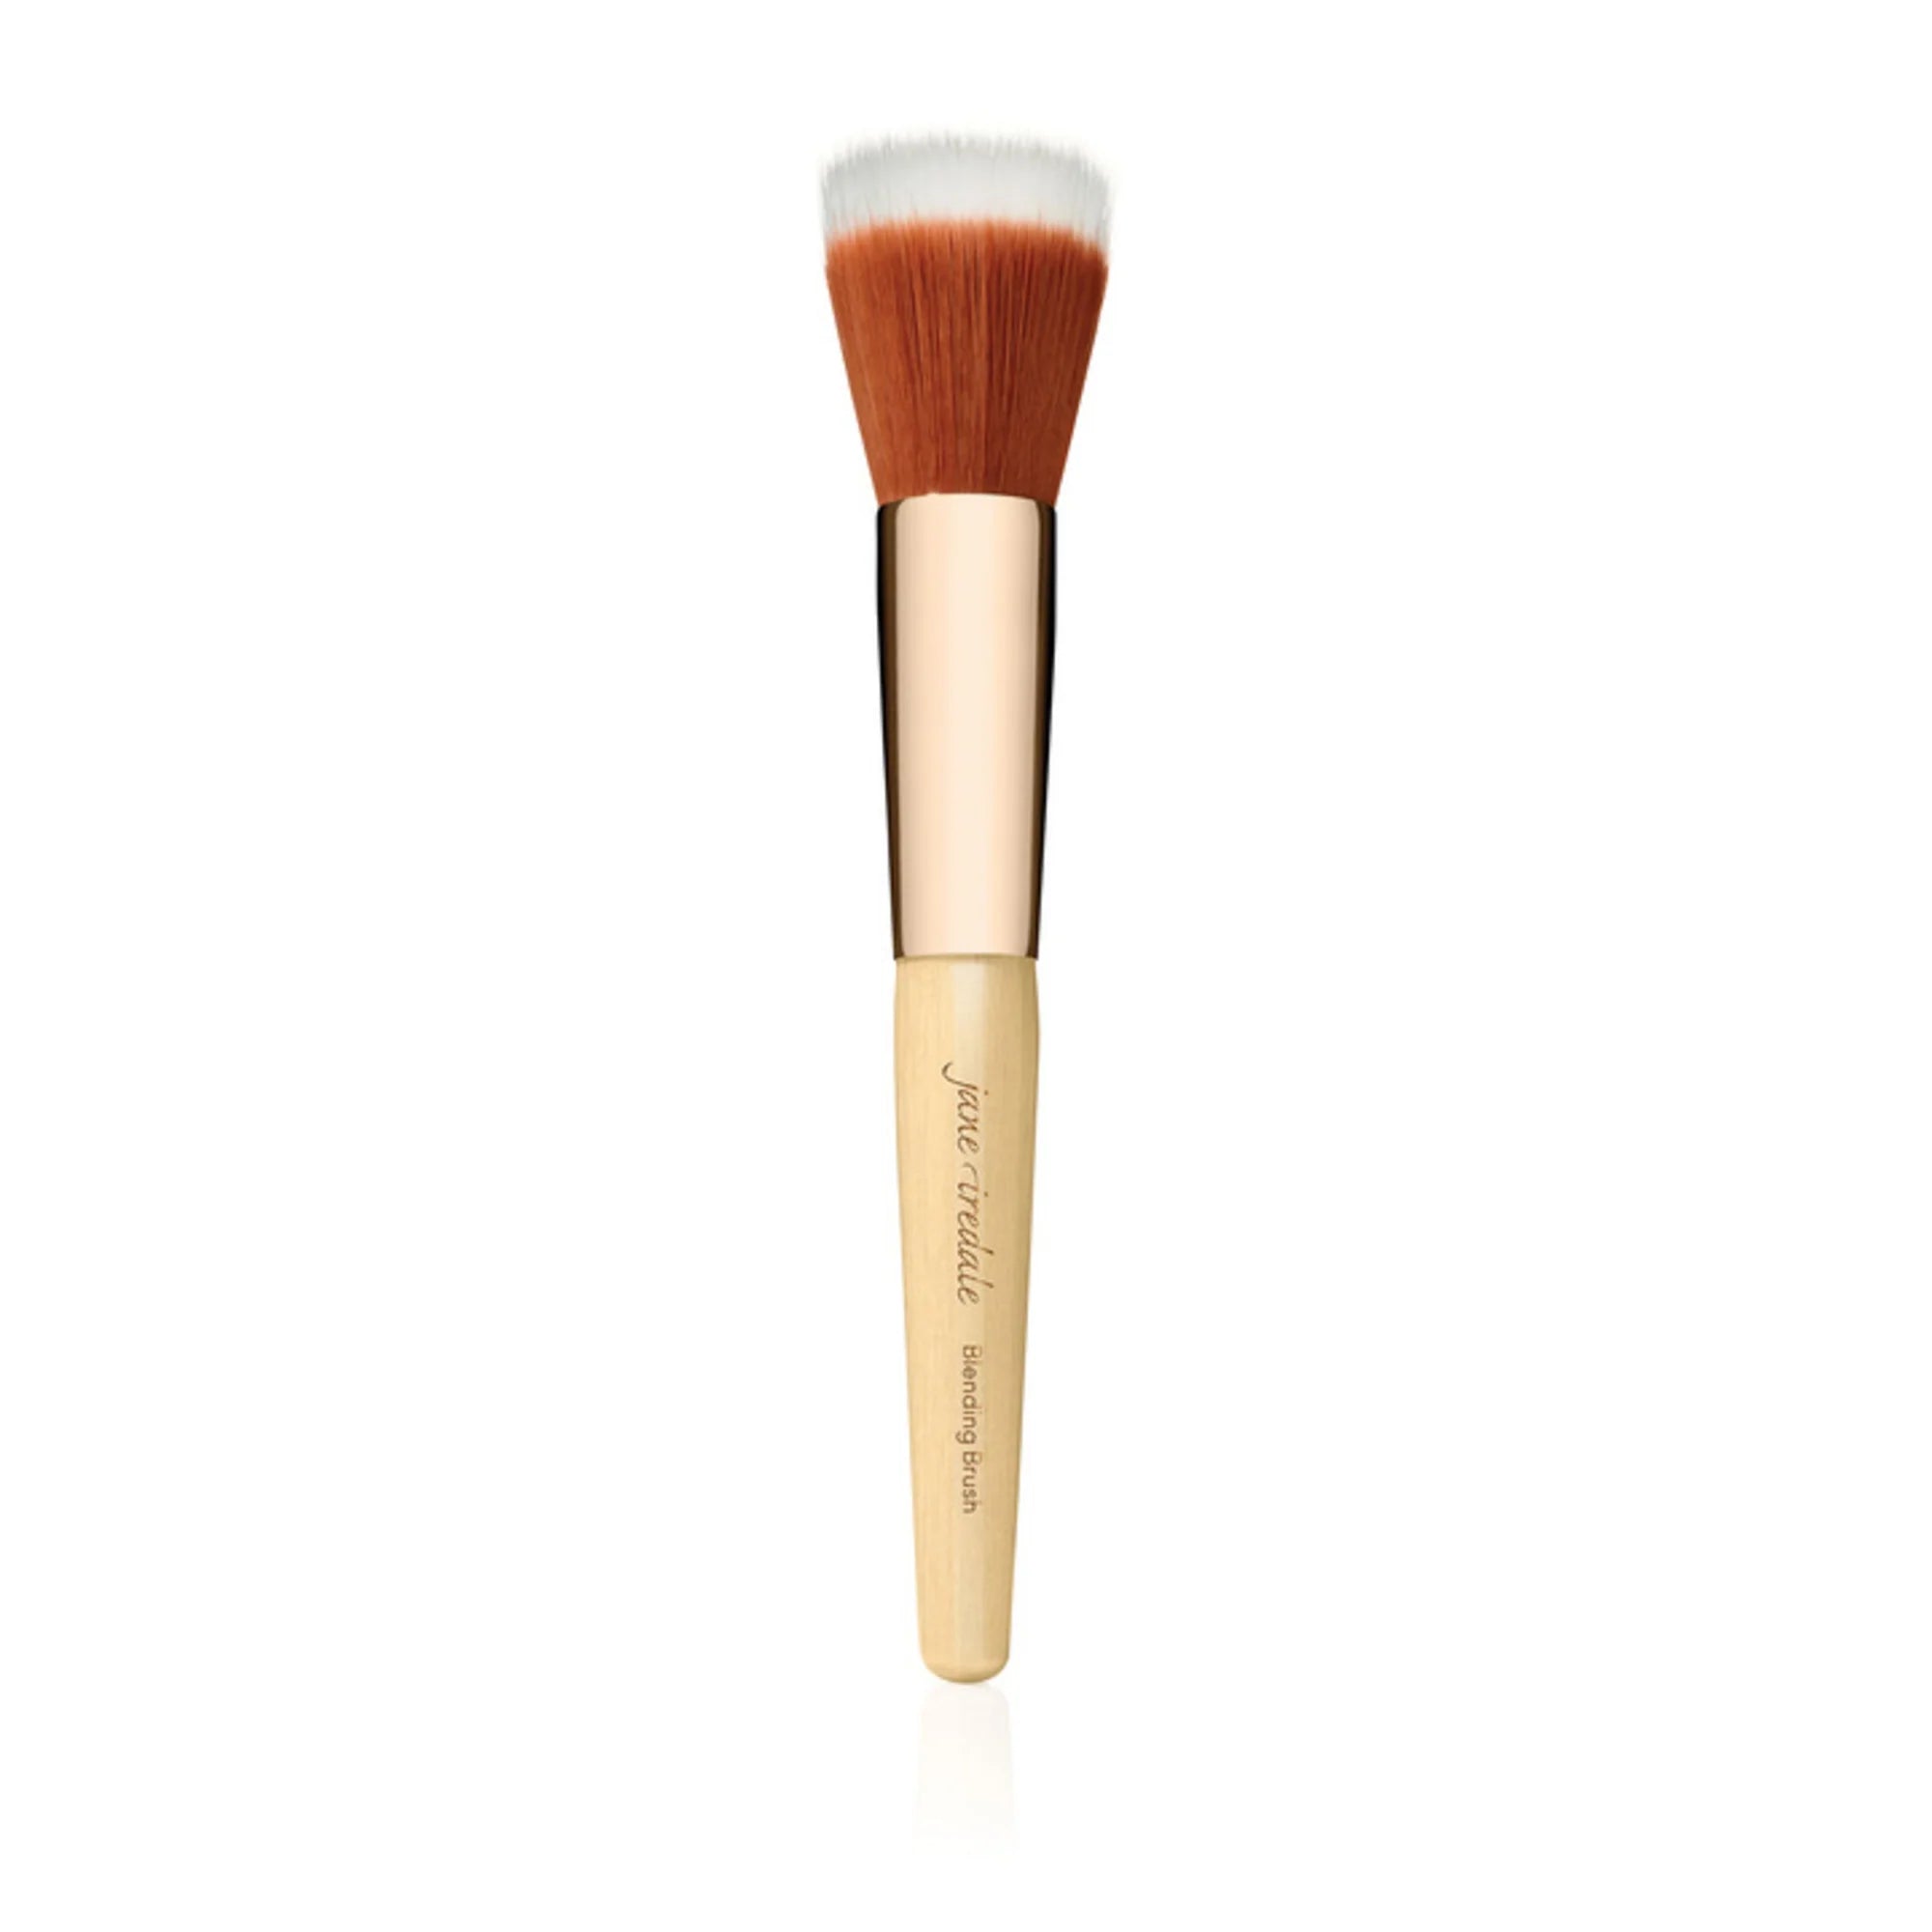 Jane Iredale's Blending Brush A dual-length brush ideal for applying both powder and cream-based products